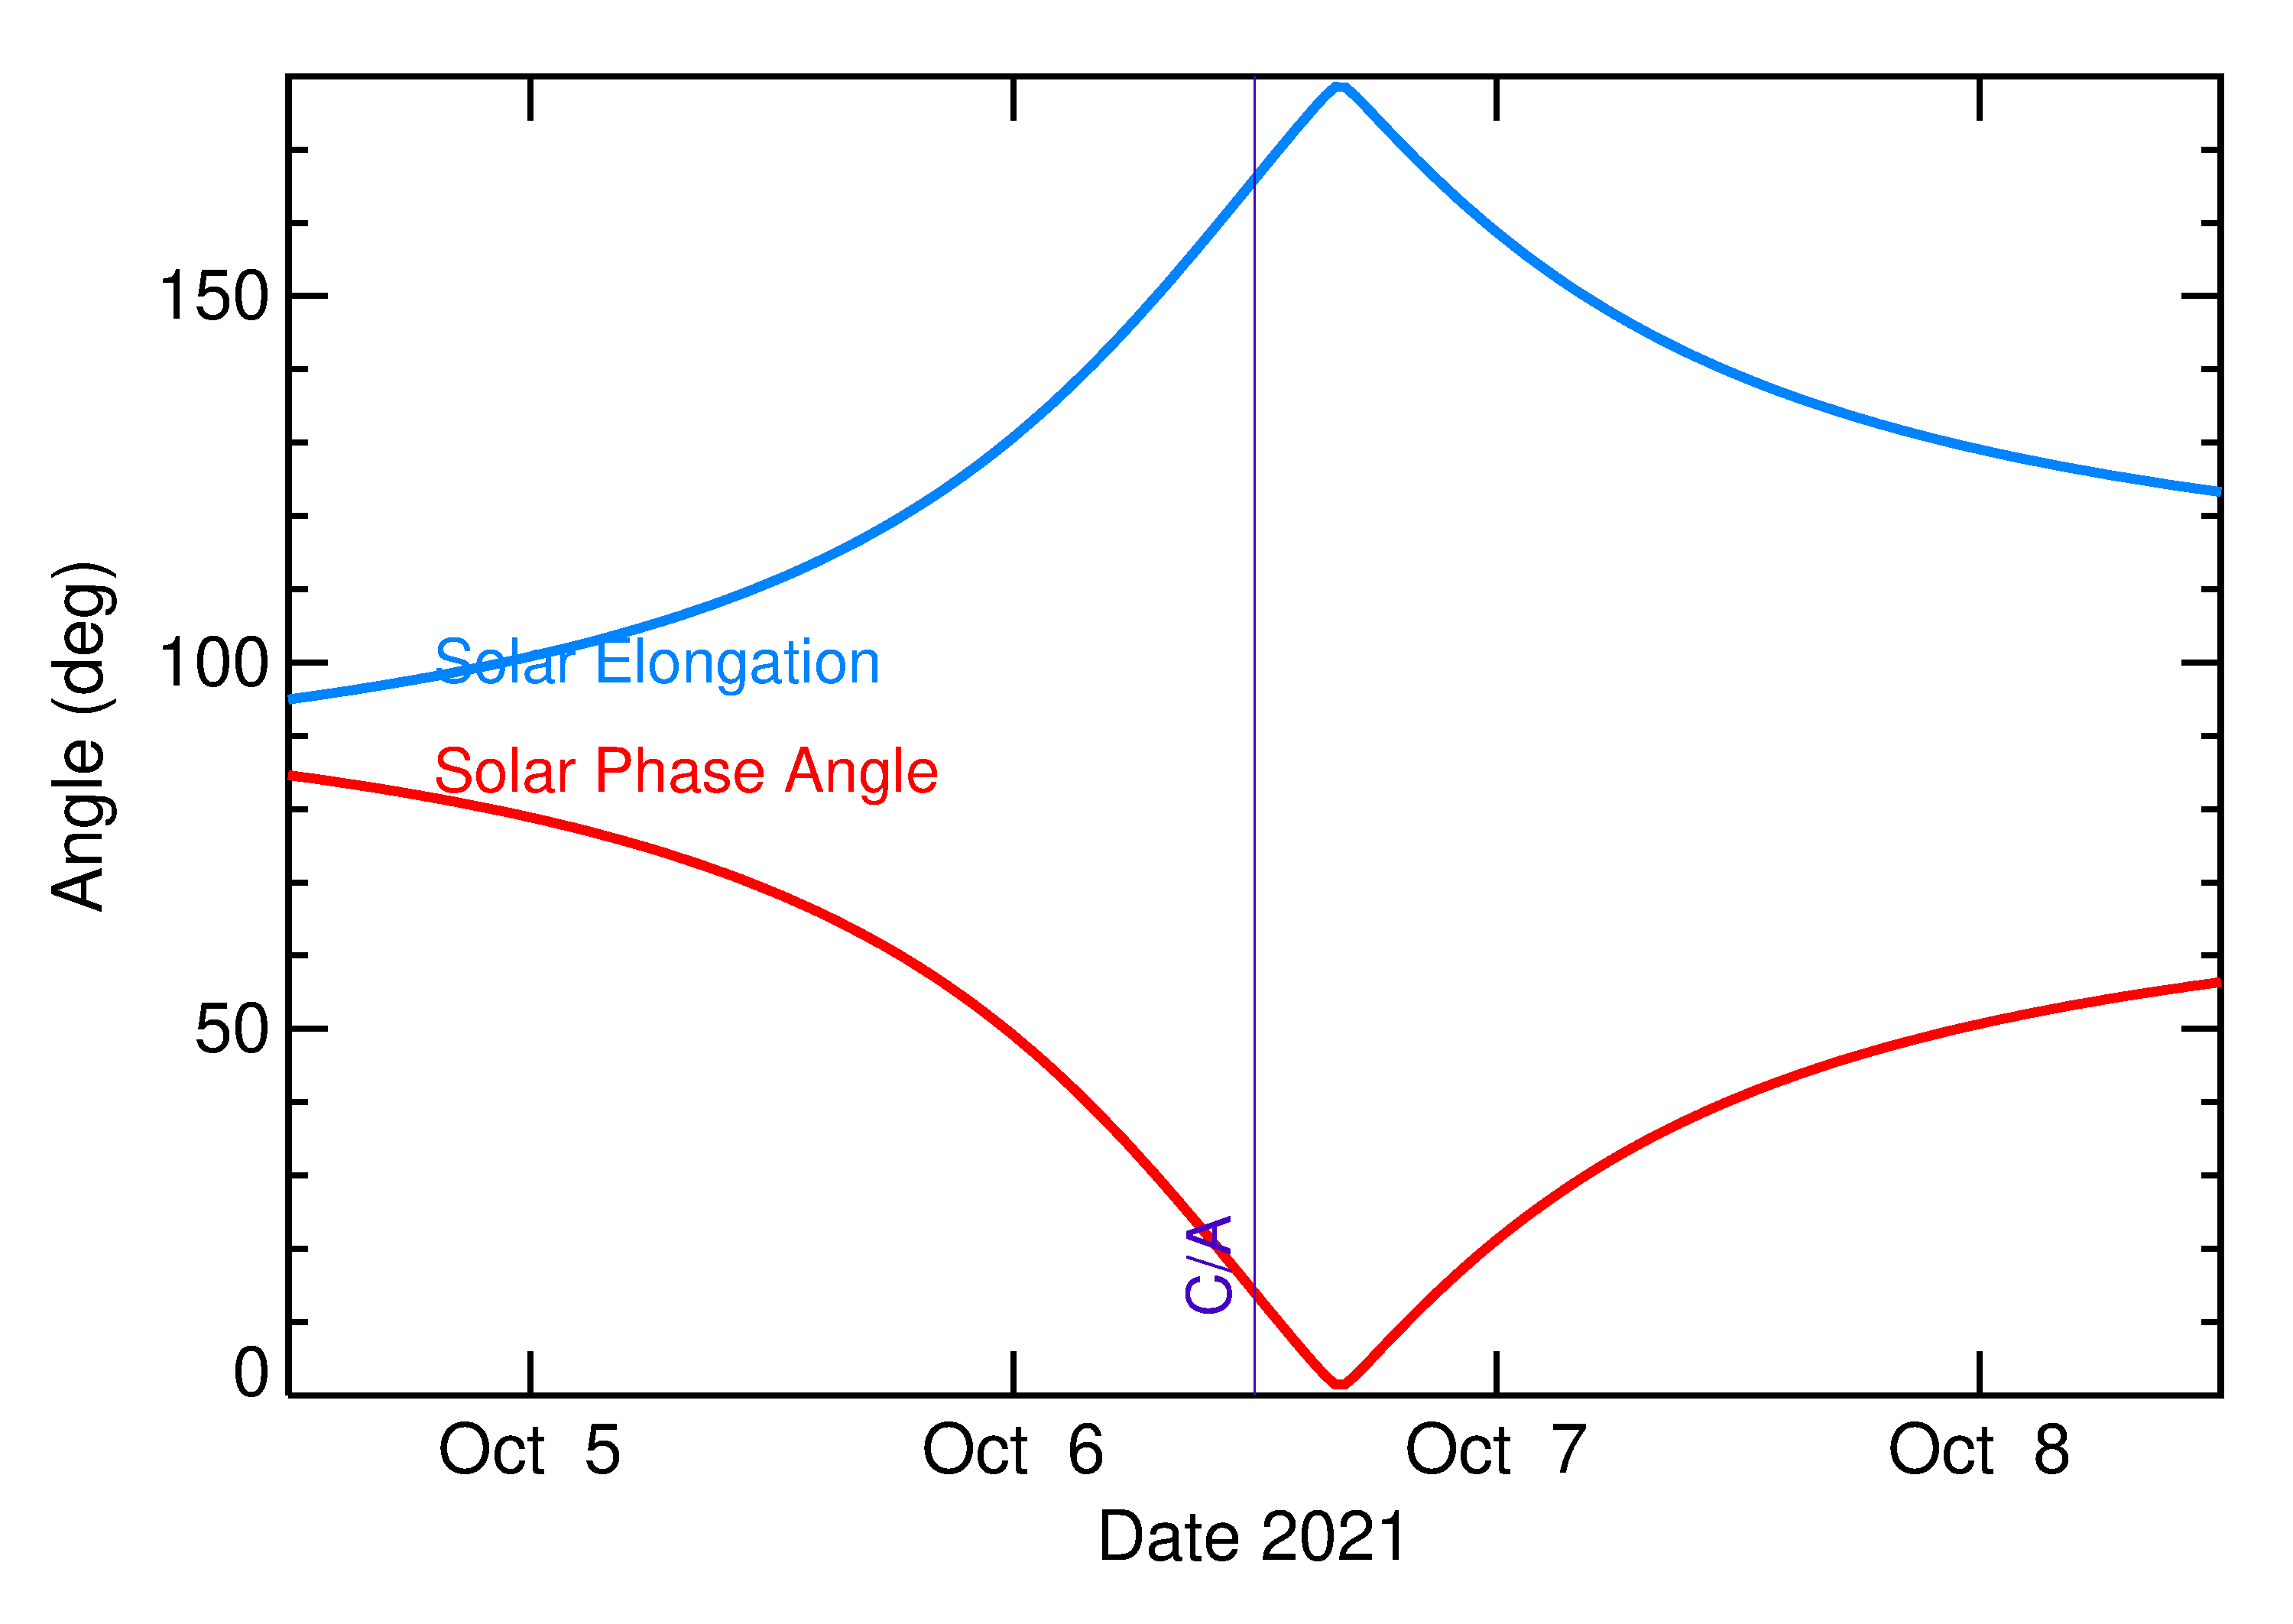 Solar Elongation and Solar Phase Angle of 2021 TQ4 in the days around closest approach